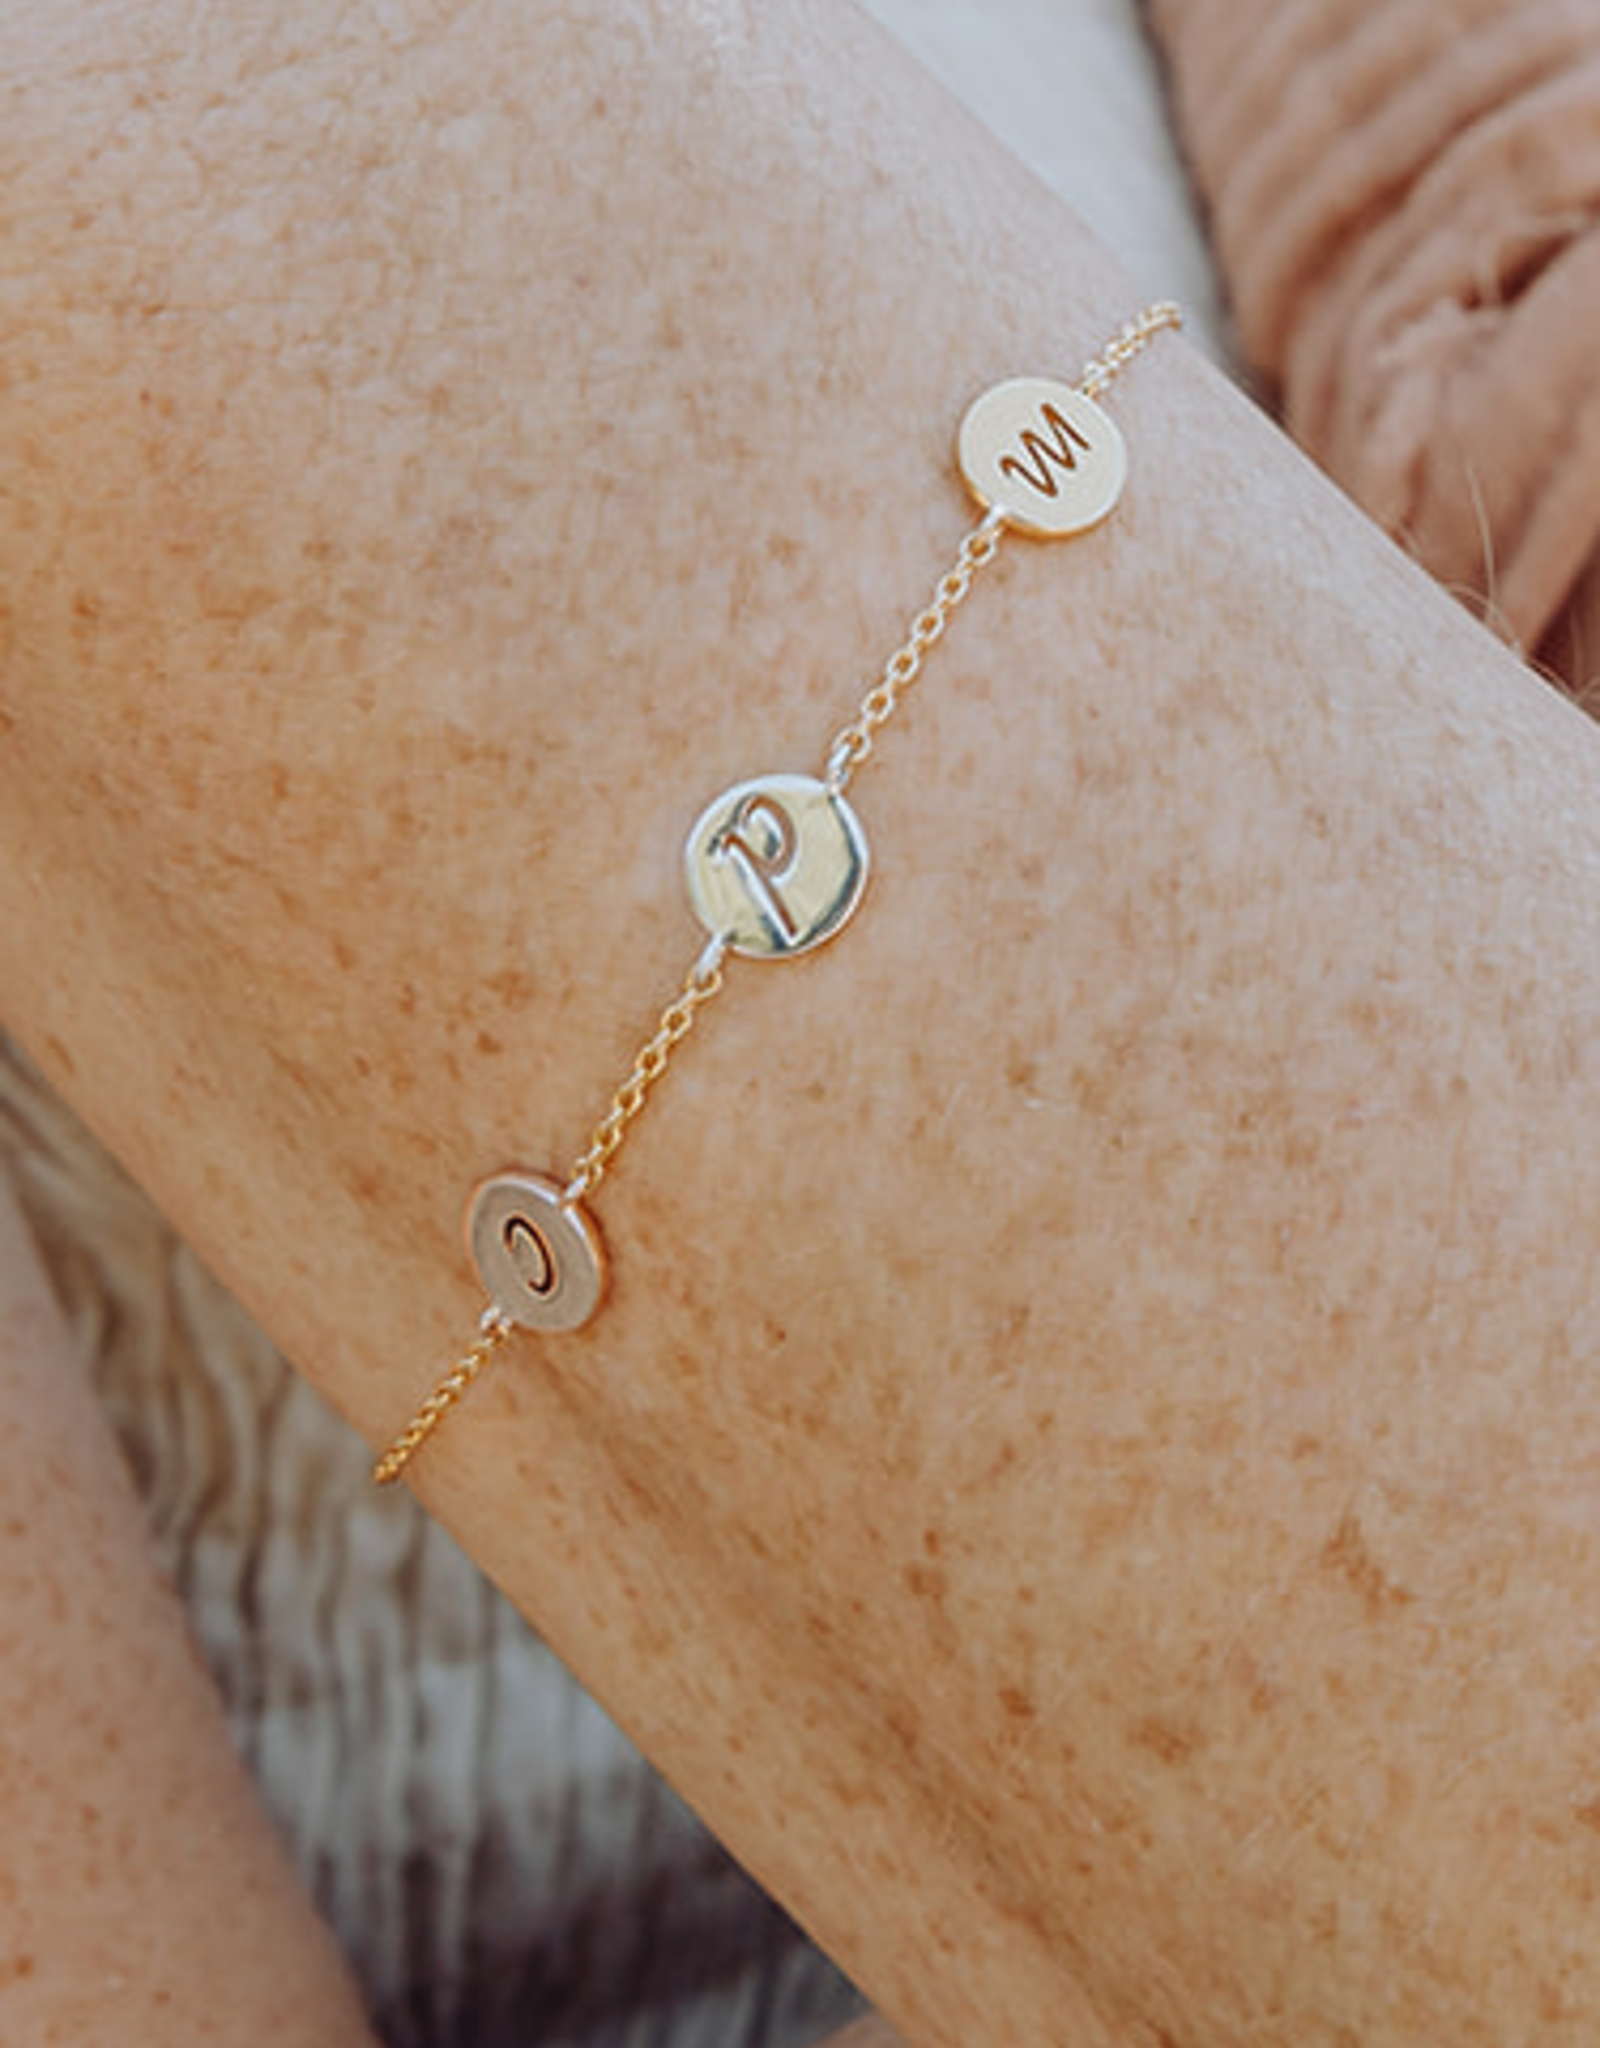 Design your bracelet with 3 charms